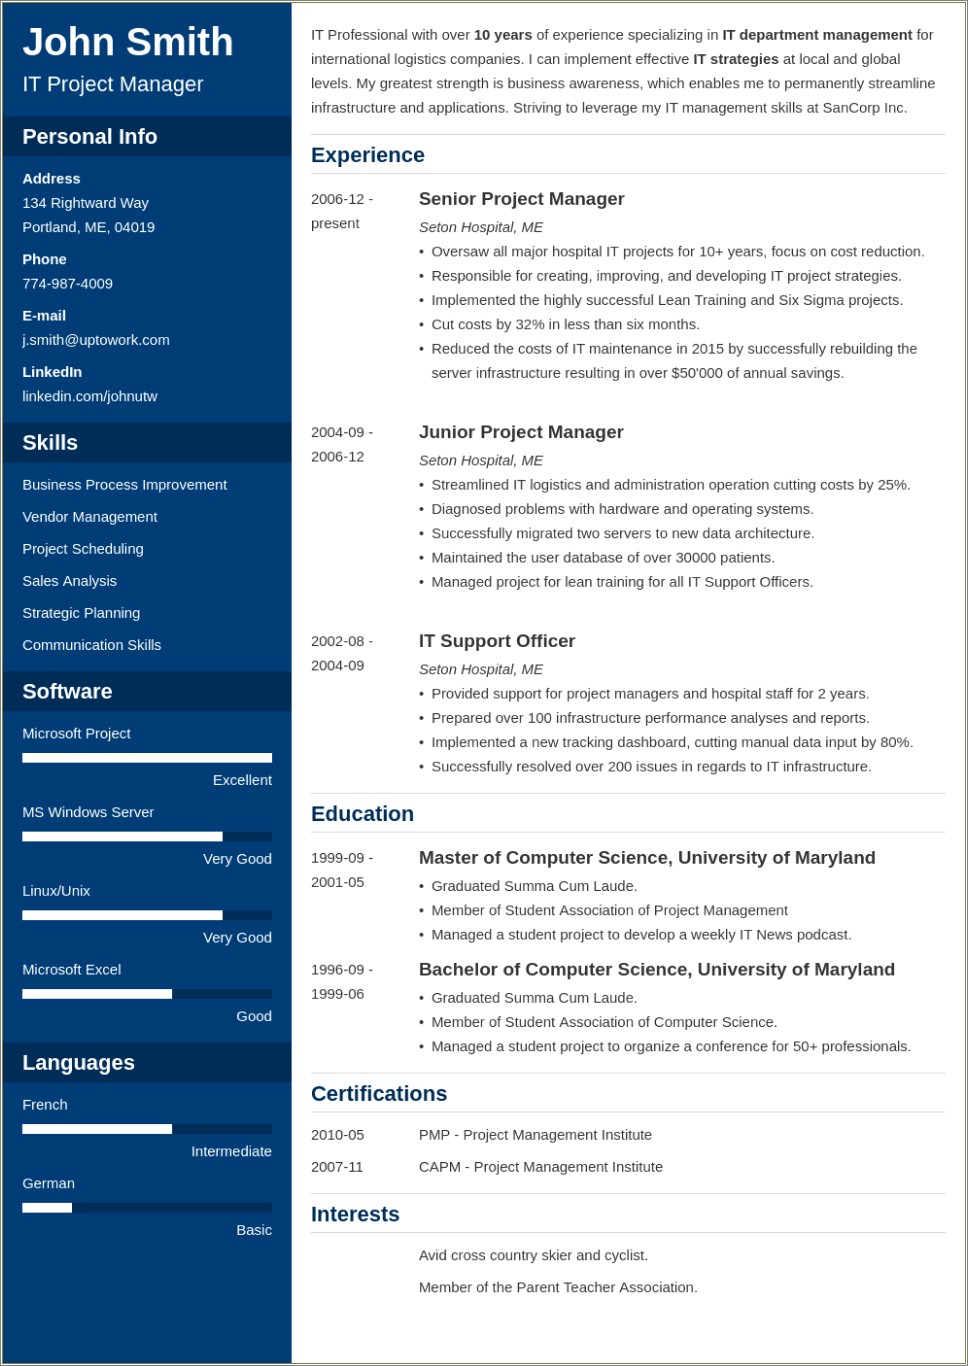 Resume Samples For Experienced It Professionals Download